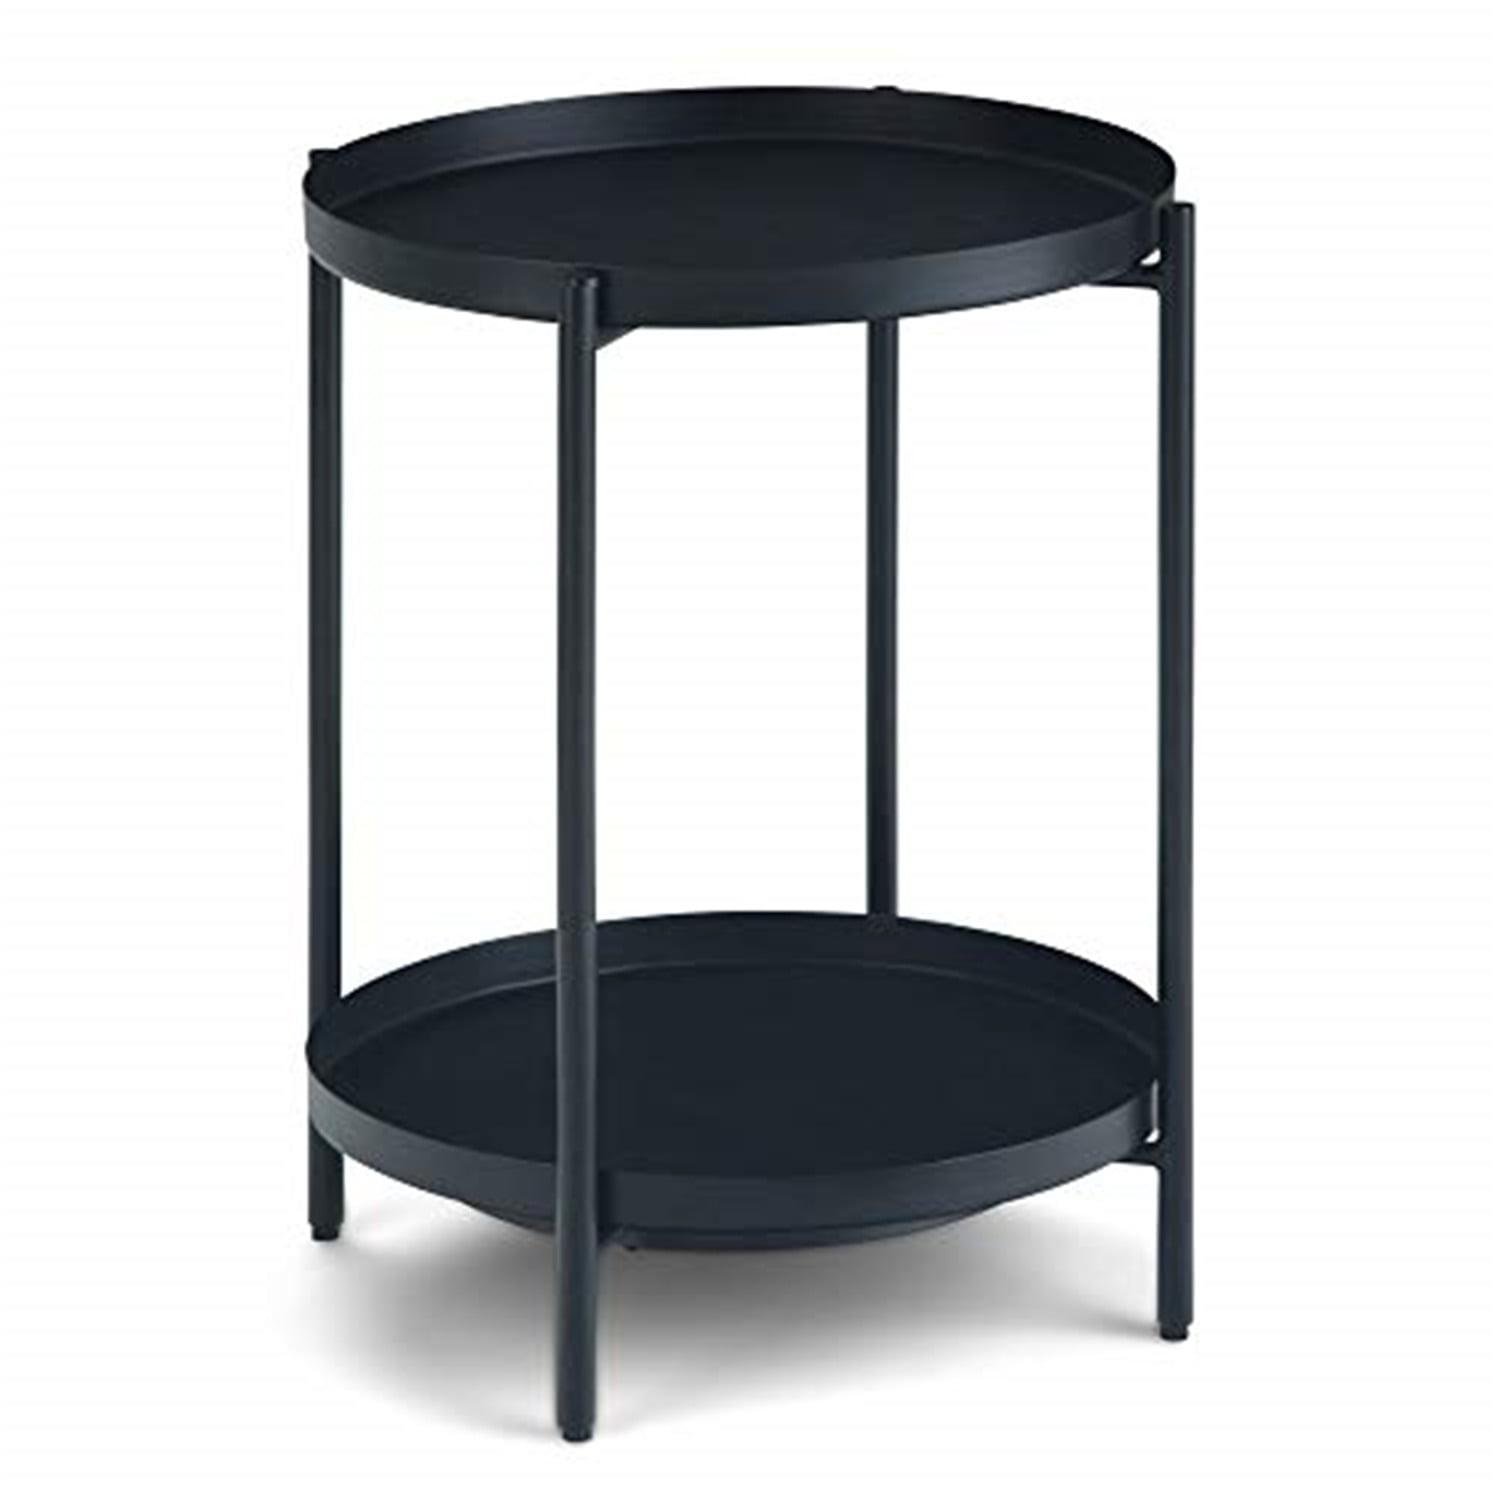 Monet Industrial Round Black Metal End Table with Removable Trays